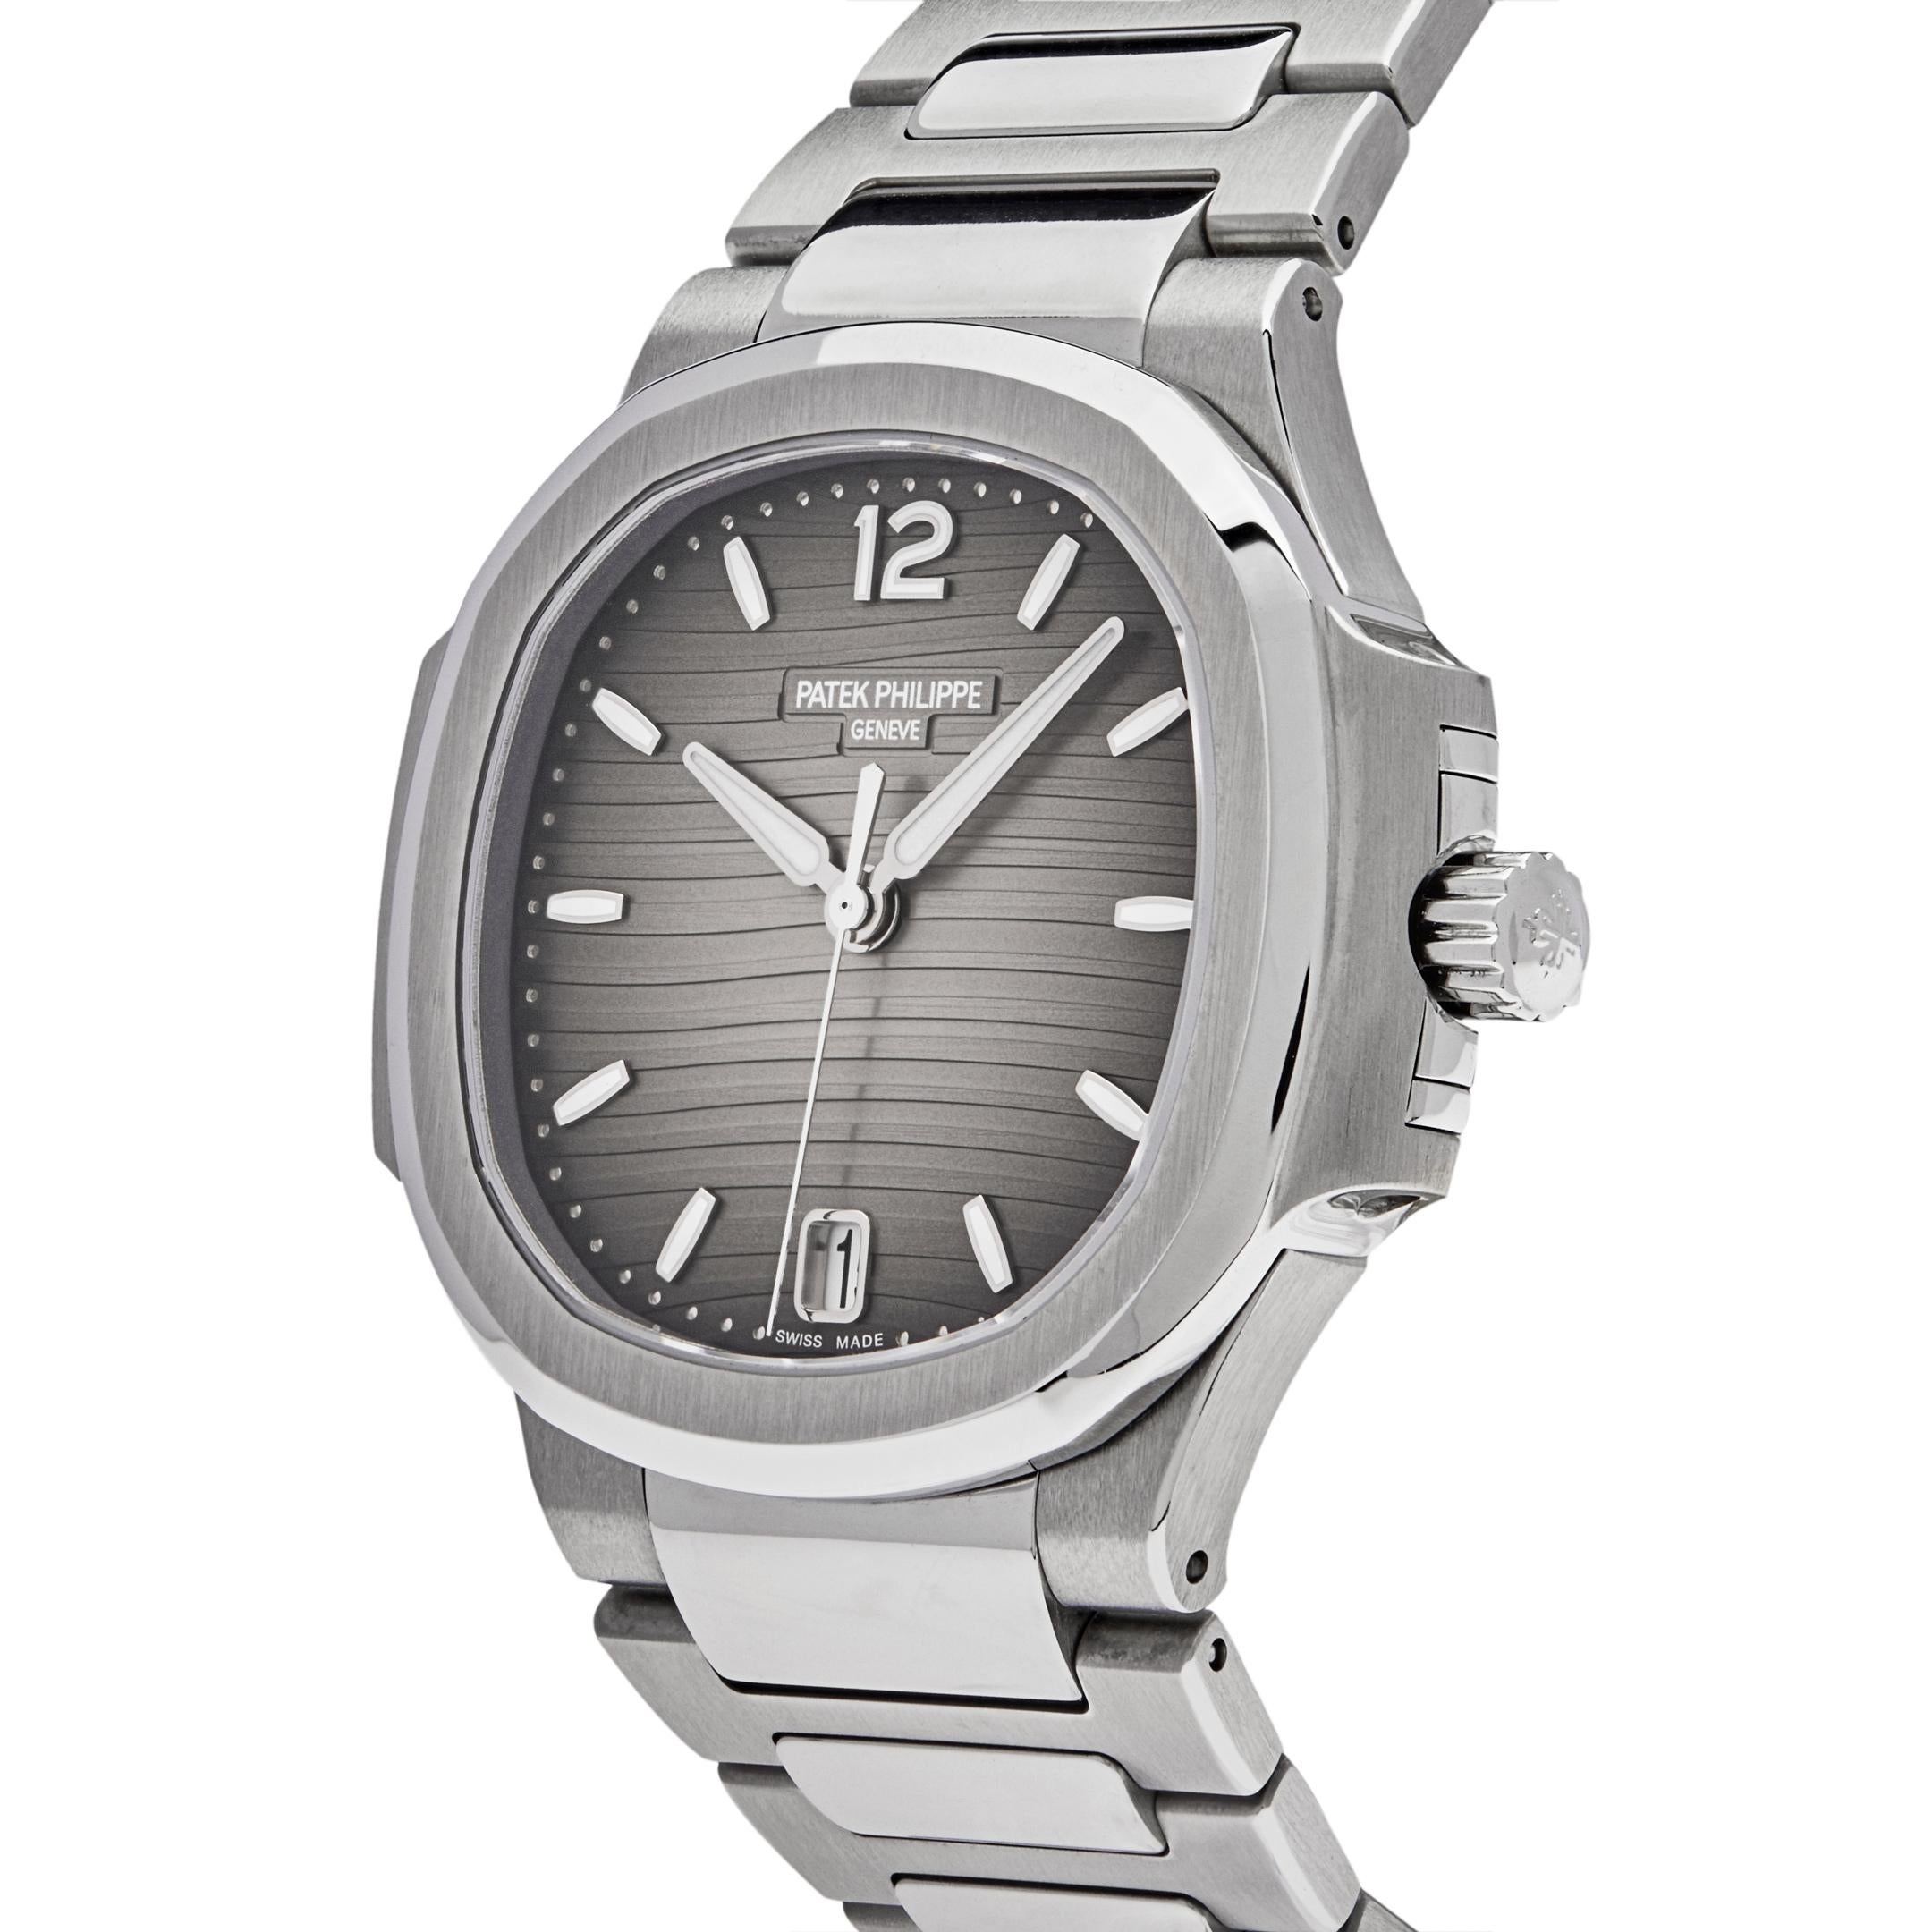 The Patek Philippe Ladies Nautilus features a round stainless steel bezel and 35mm stainless steel case. In the center, lays a smoke grey dial with gold applied numerals and hour markers. It comes on a stainless steel bracelet with a fold-over clasp